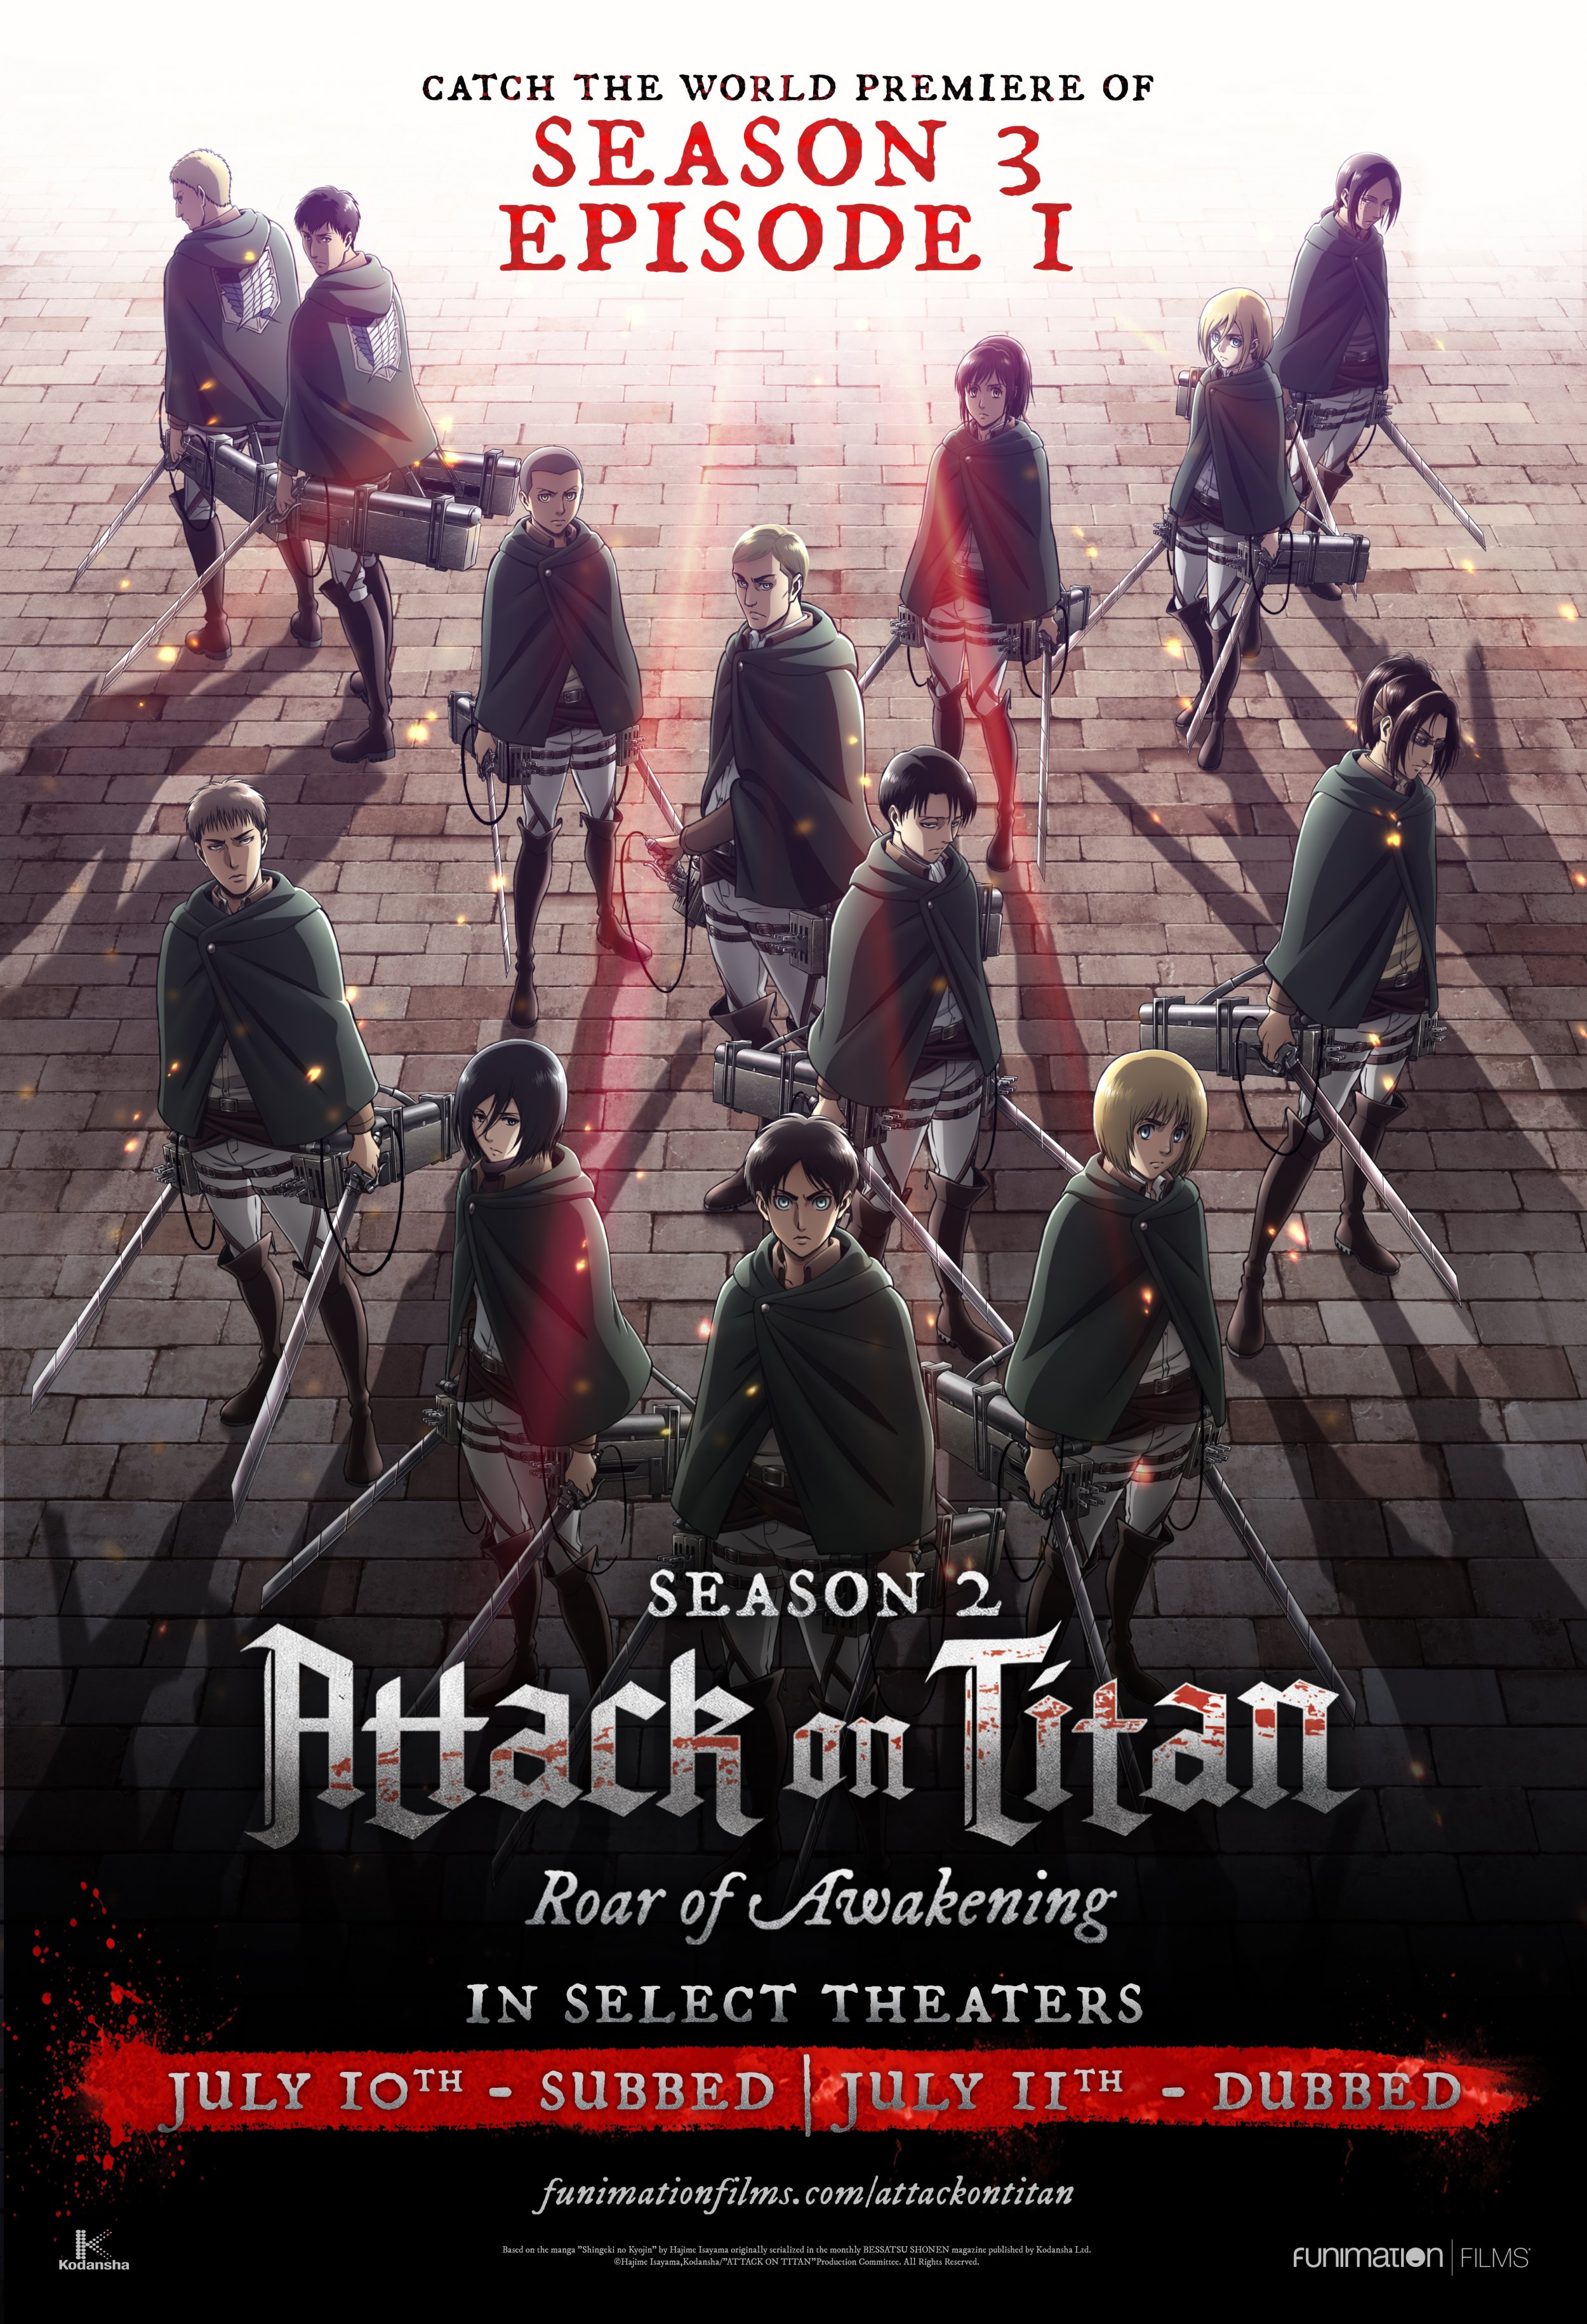 Upcoming Attack on Titan Movie Will Recap the First Three Seasons